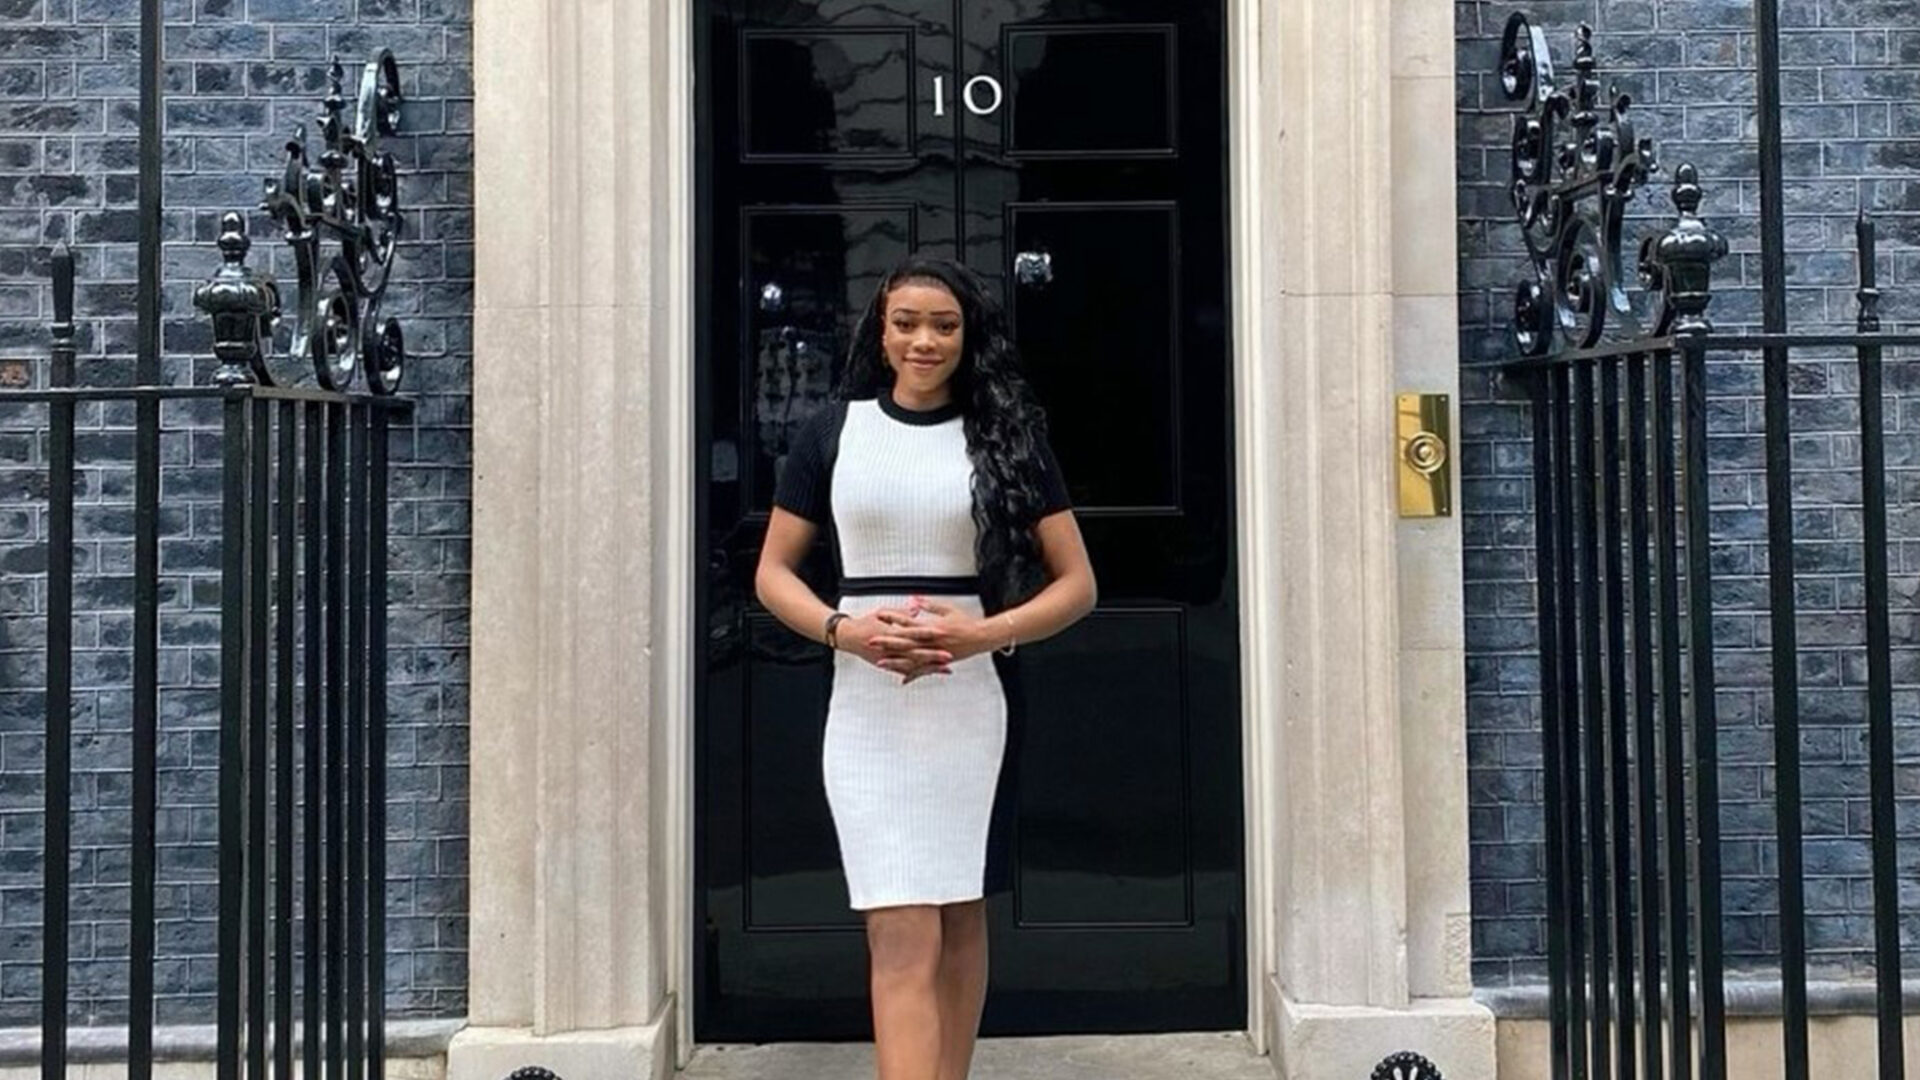 We have since been to the Prime Minister’s Office at No.10 Downing Street to discuss the campaign, and the Prime Minister’s Office formally announced their support of new national guidance against Afro hair discrimination in schools. No. 10 Downing Street L'myah Sherae: Policy expert, campaigner, and CEO of Enact Equality